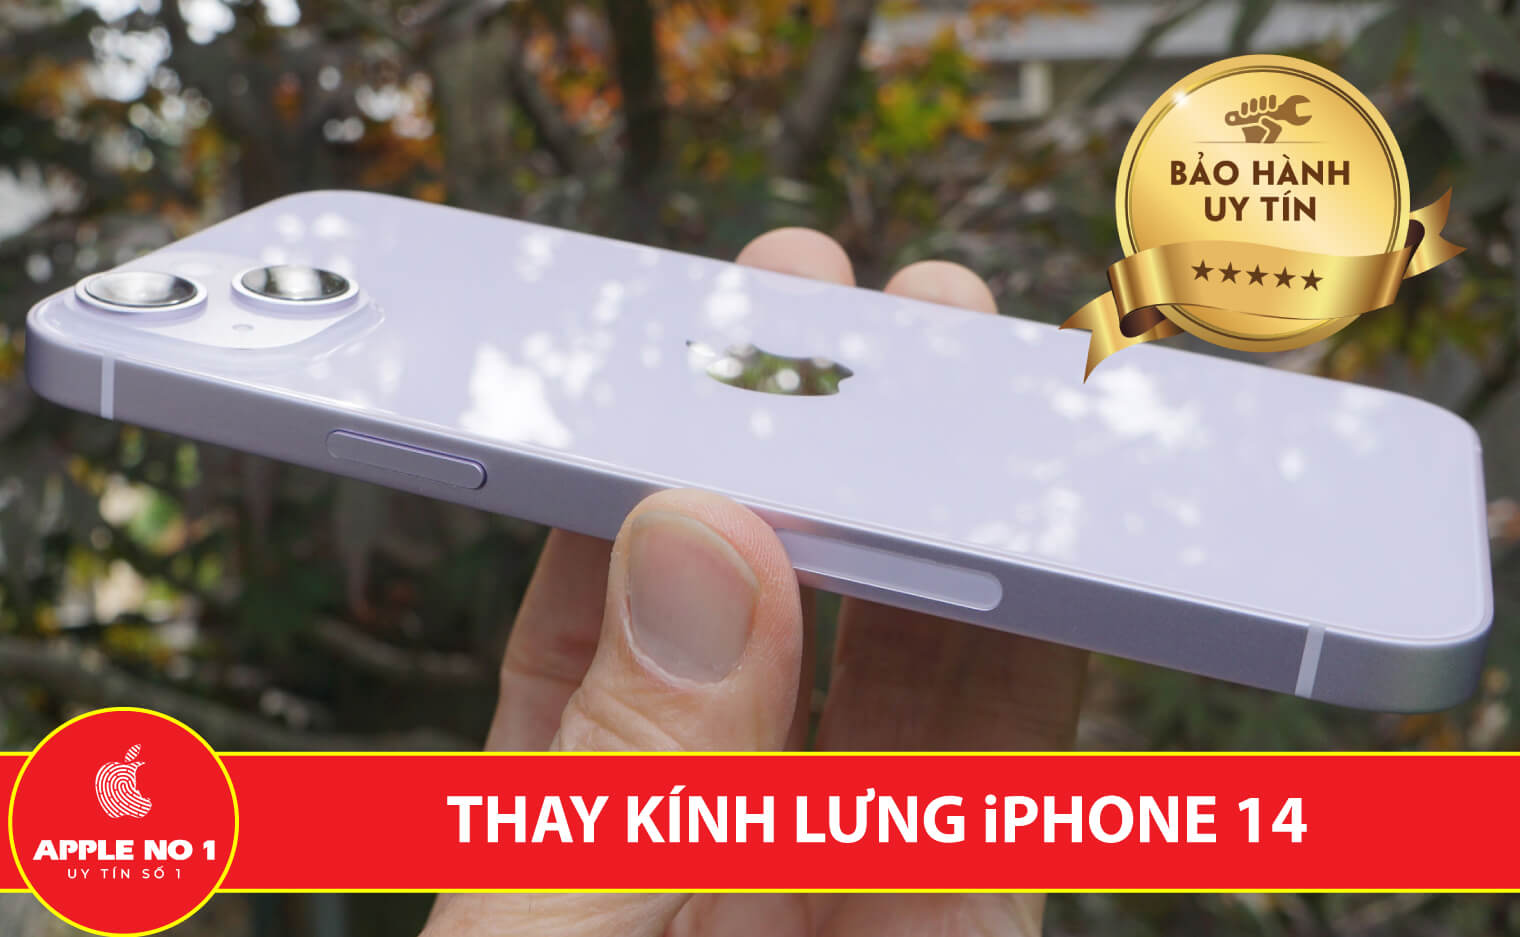 thay kinh lung iphone 14